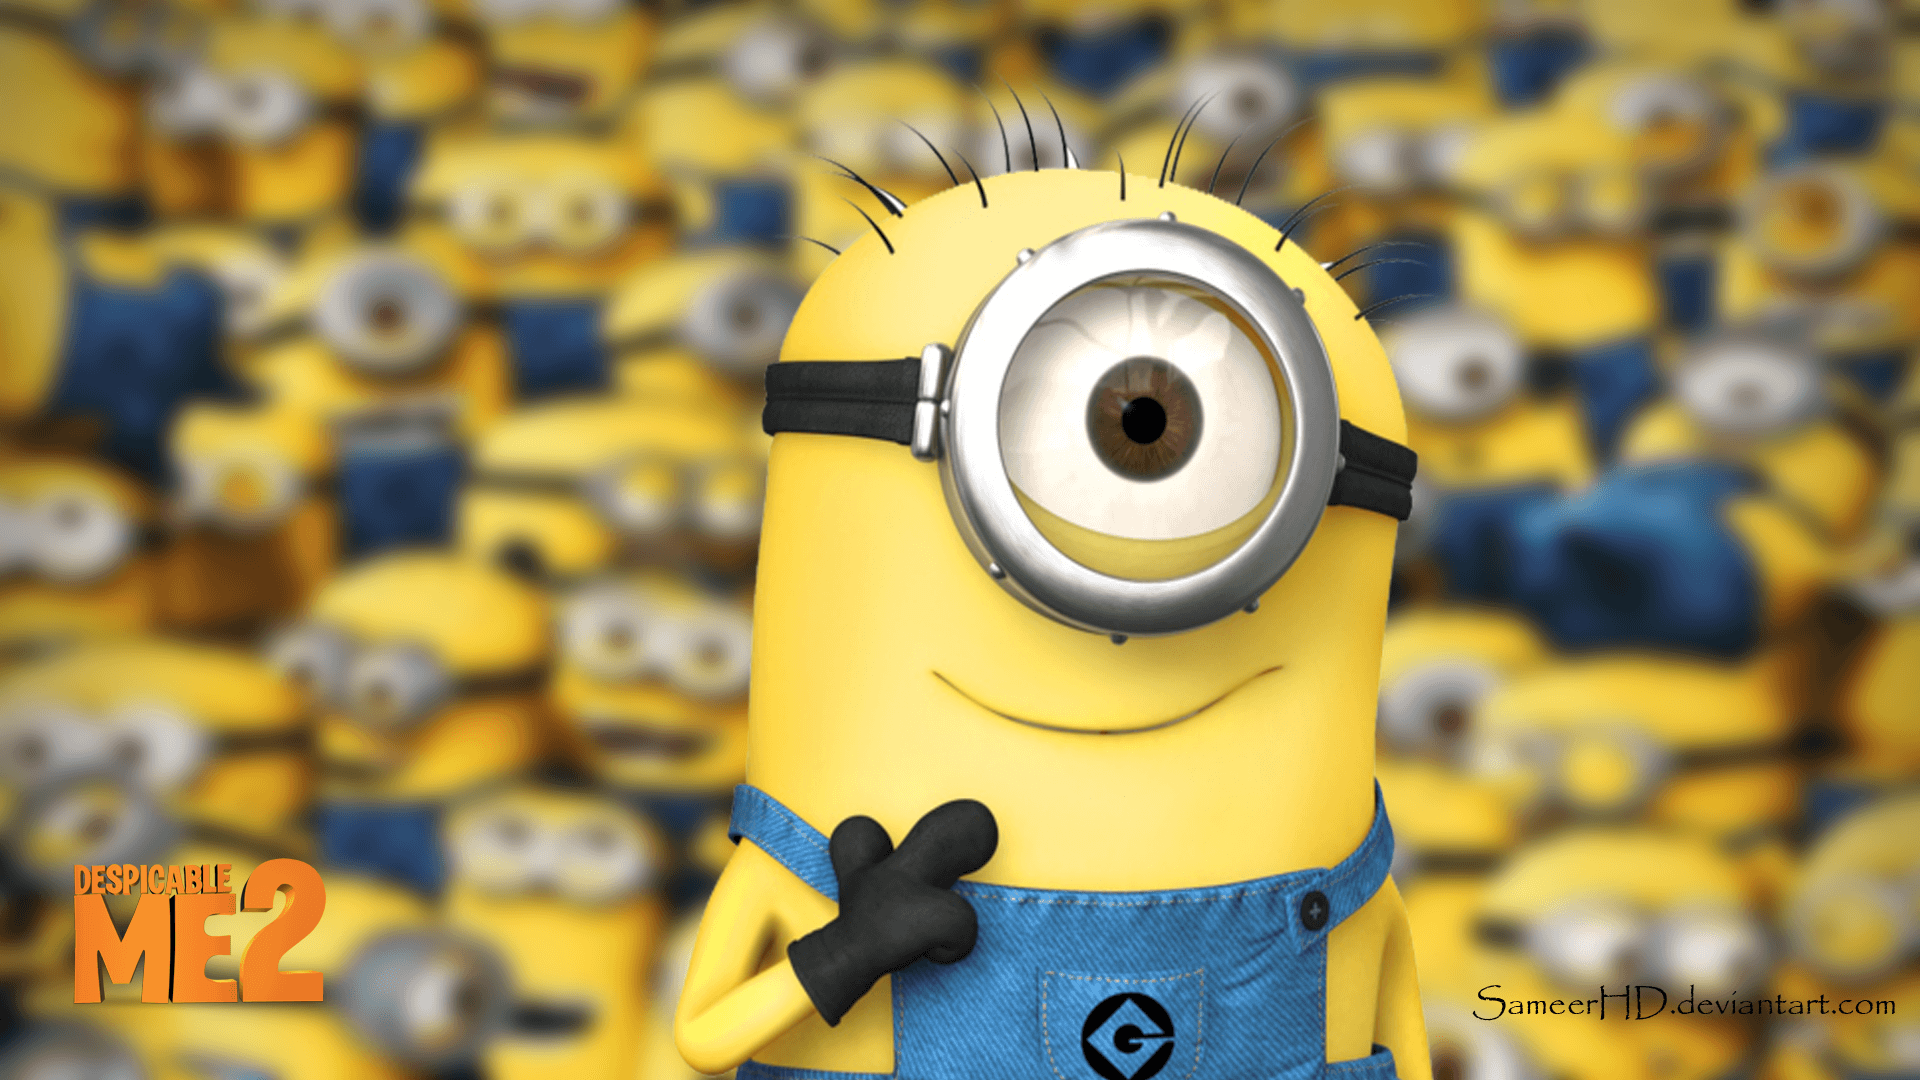 Despicable Me 3 HD Wallpapers